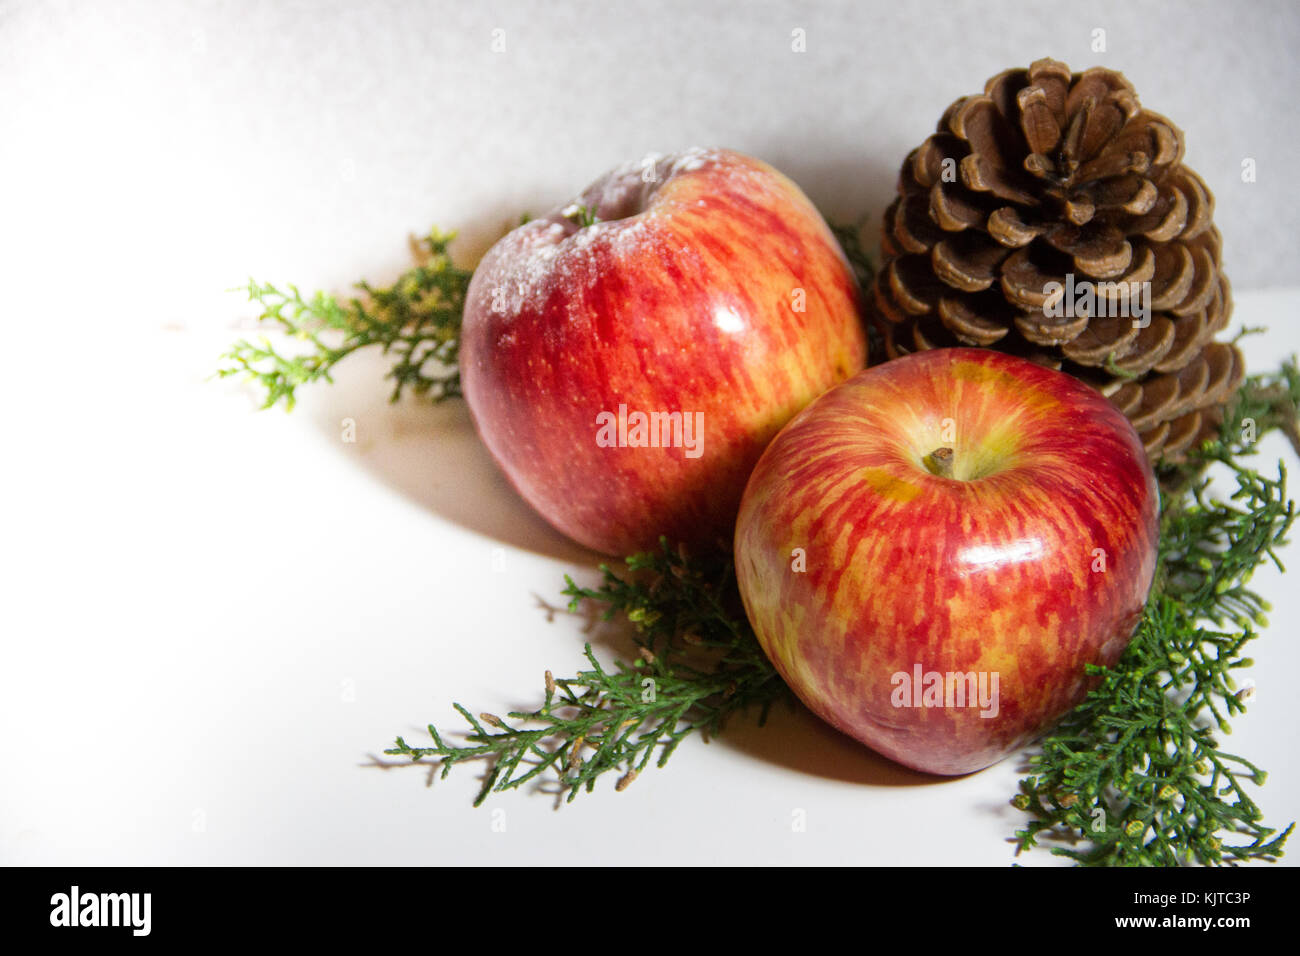 Christmas decoration with red apples, pines and pineapples Stock Photo